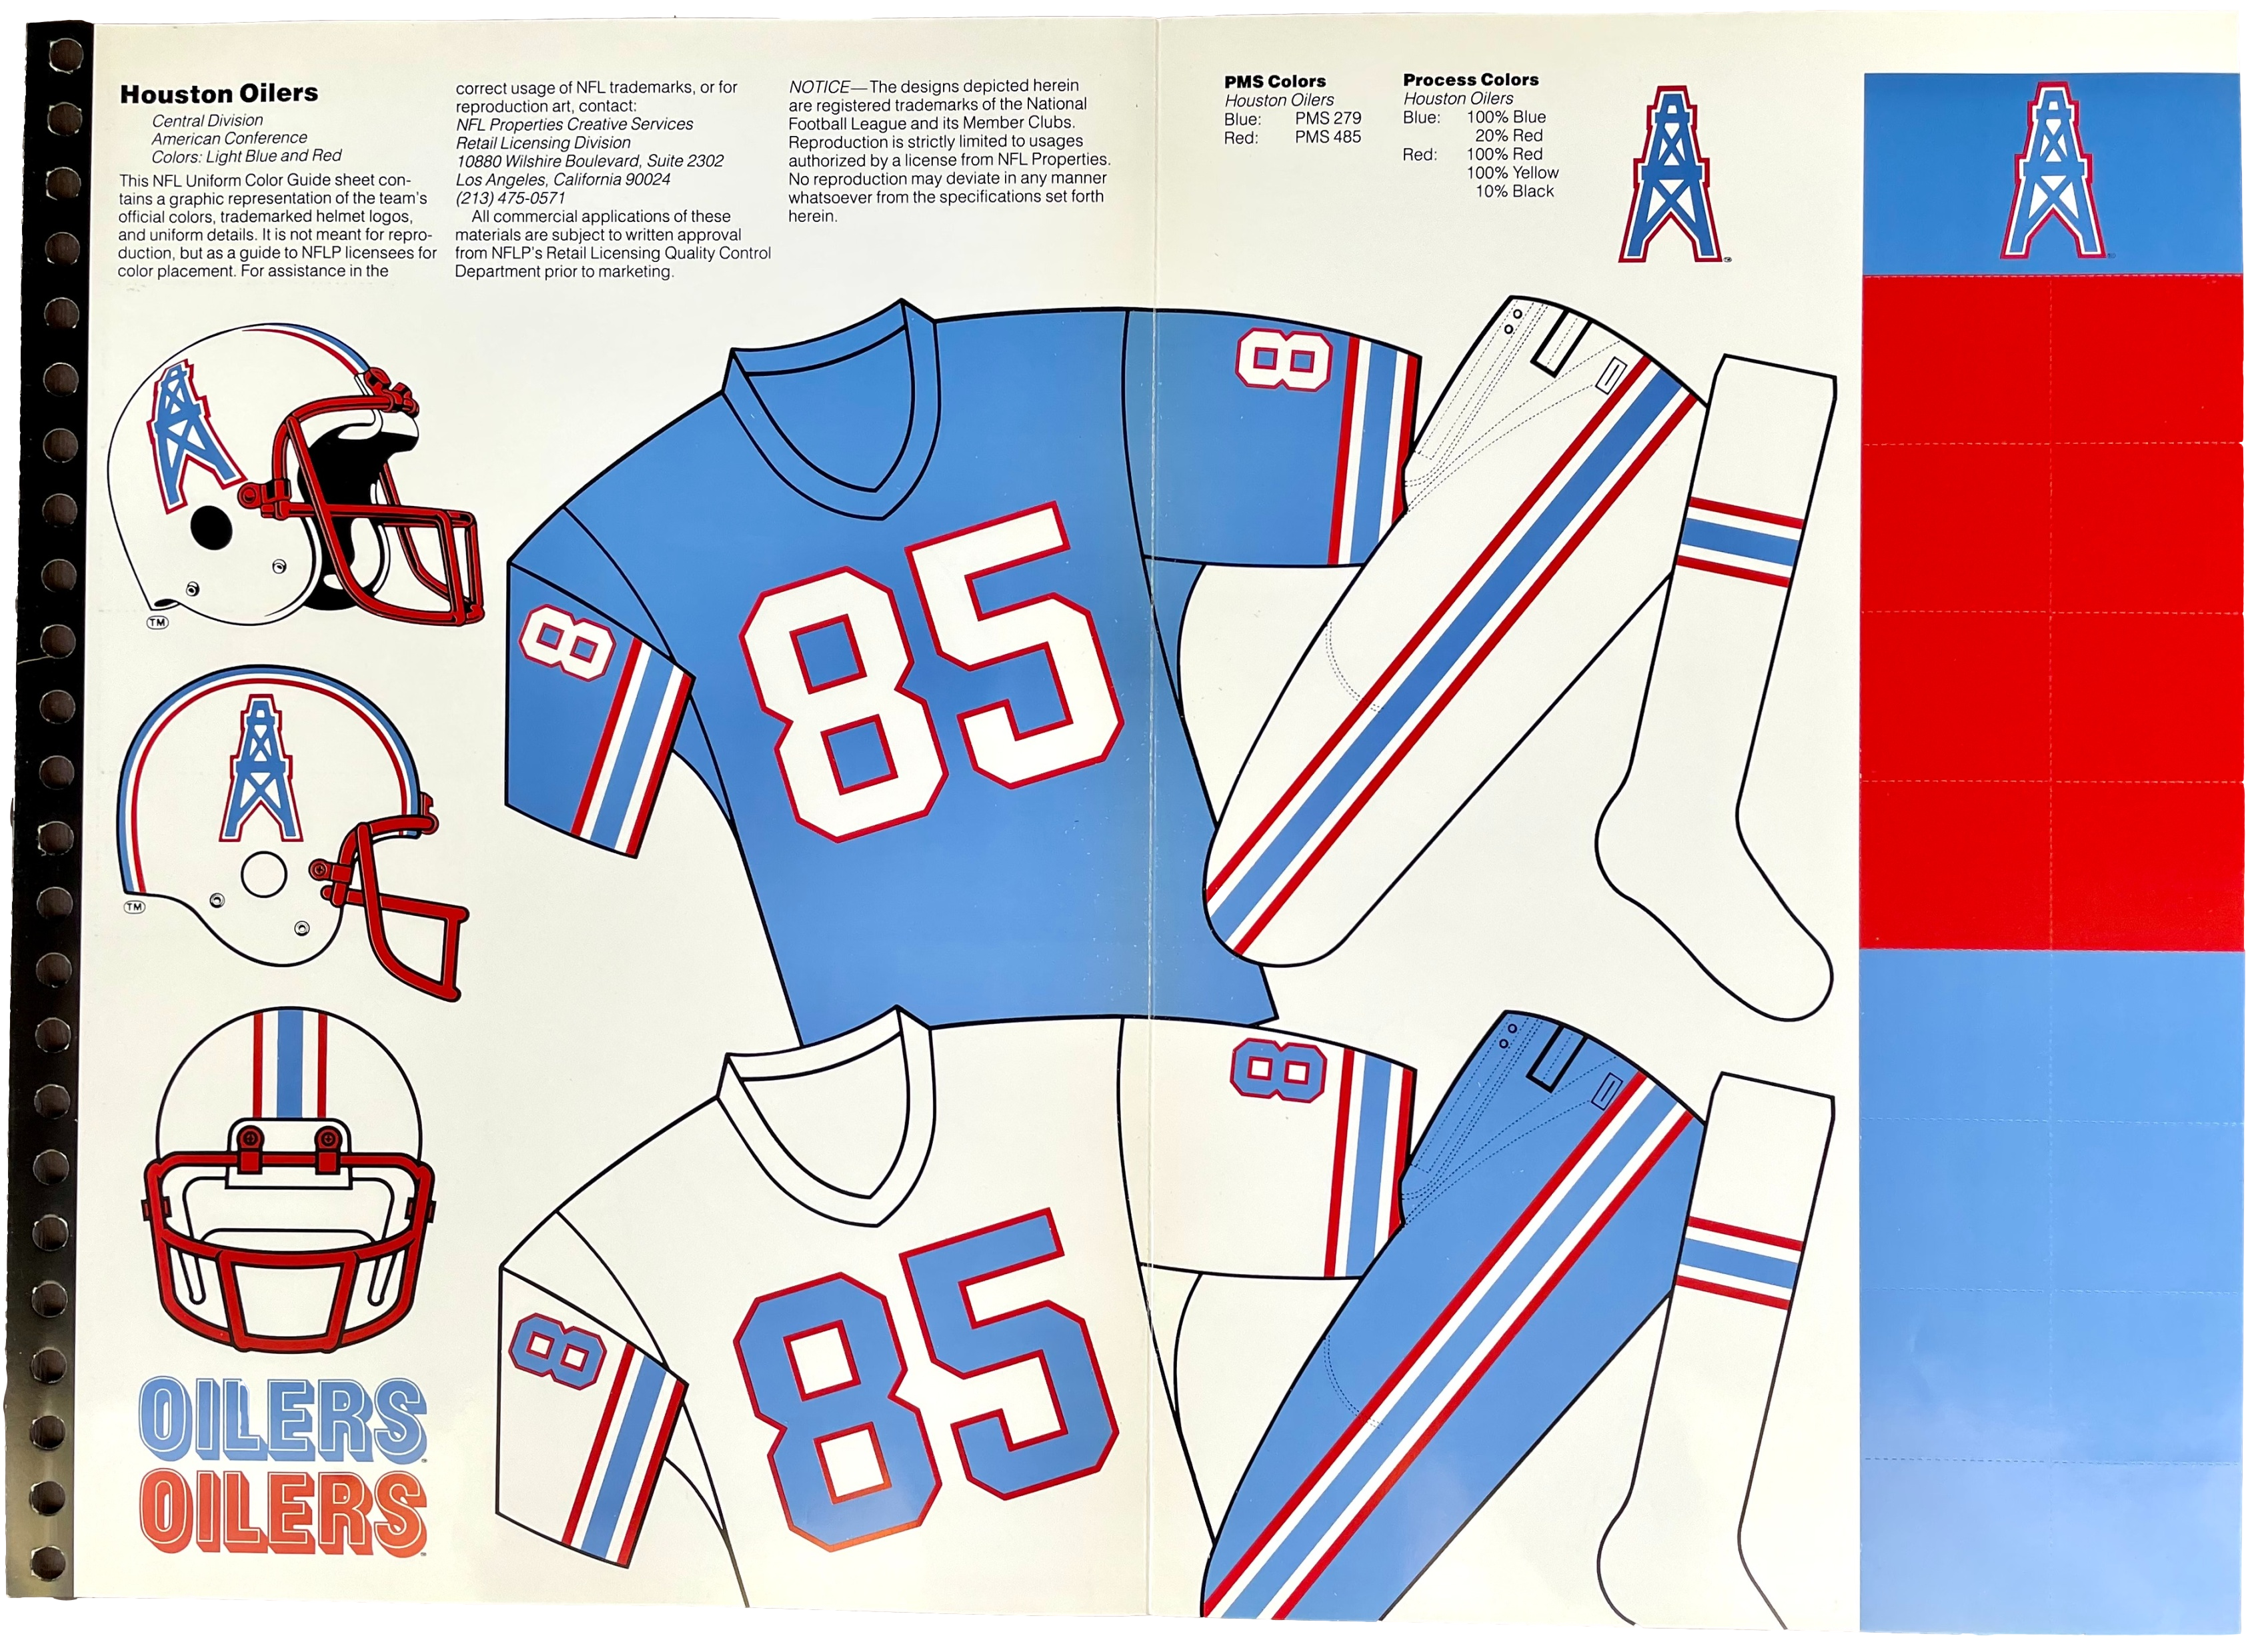 We should wear the Houston Oilers throwback jerseys for our next